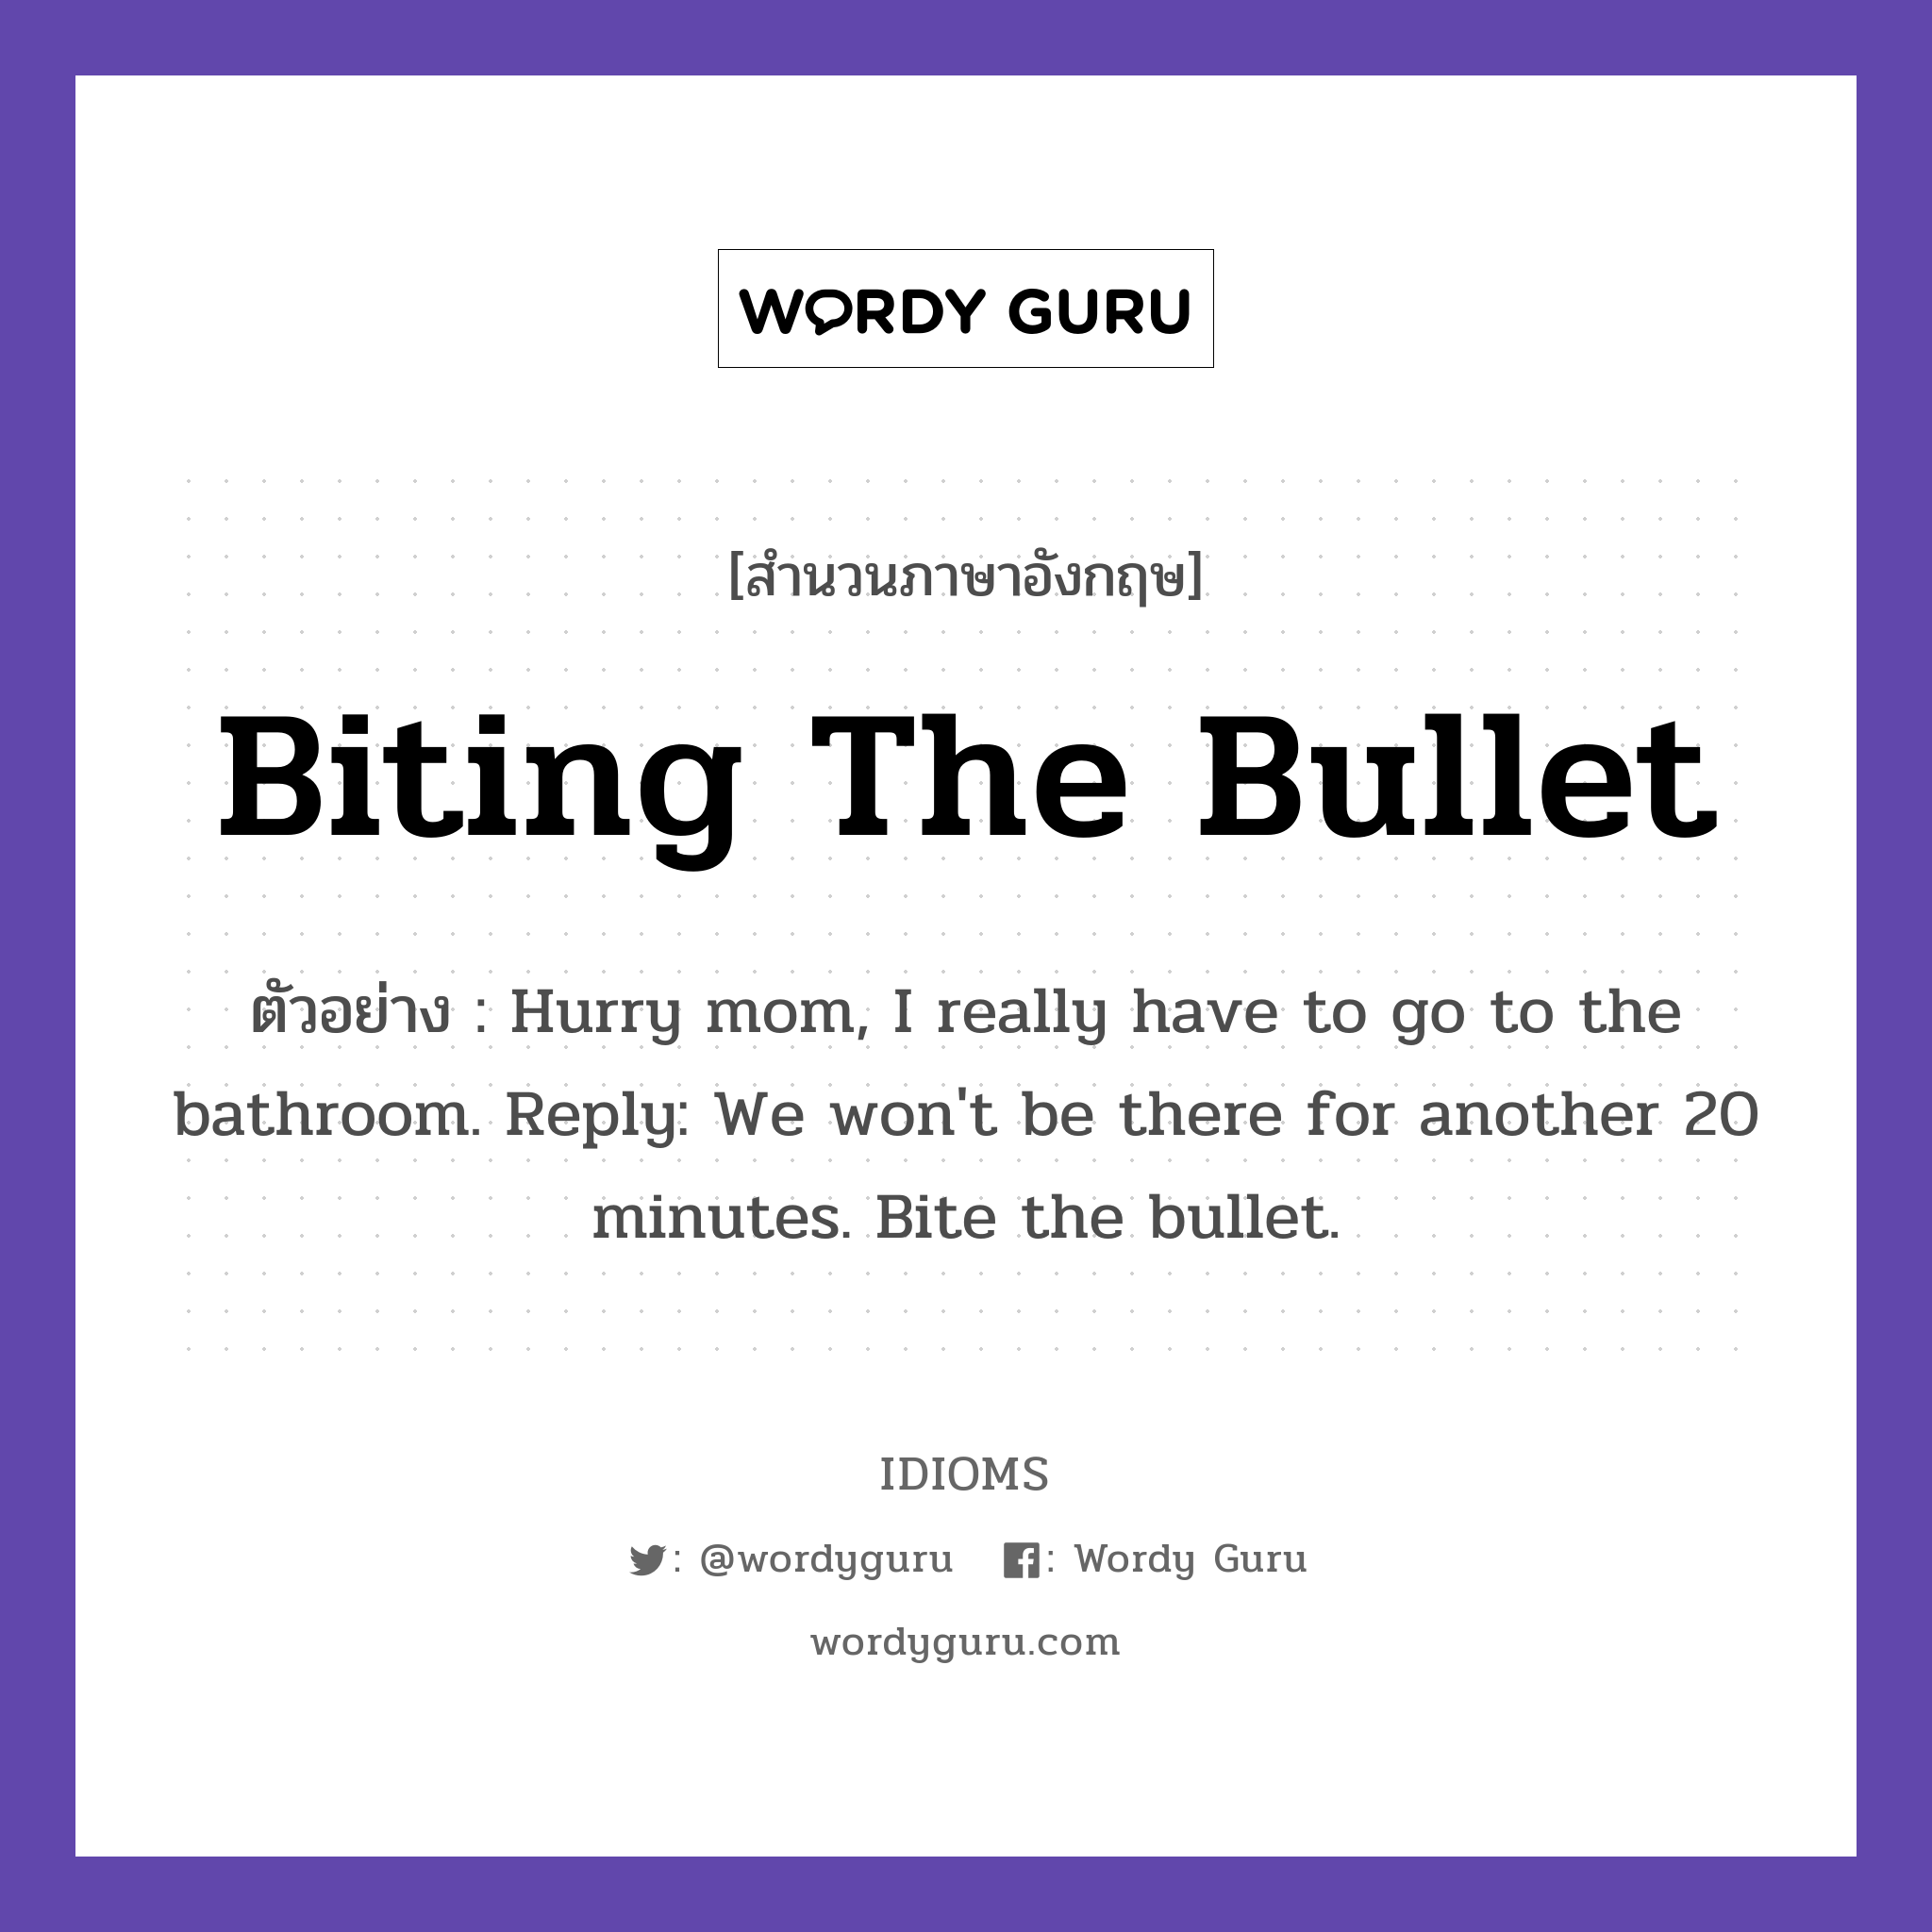 Biting The Bullet แปลว่า?, สำนวนภาษาอังกฤษ Biting The Bullet ตัวอย่าง Hurry mom, I really have to go to the bathroom. Reply: We won't be there for another 20 minutes. Bite the bullet.